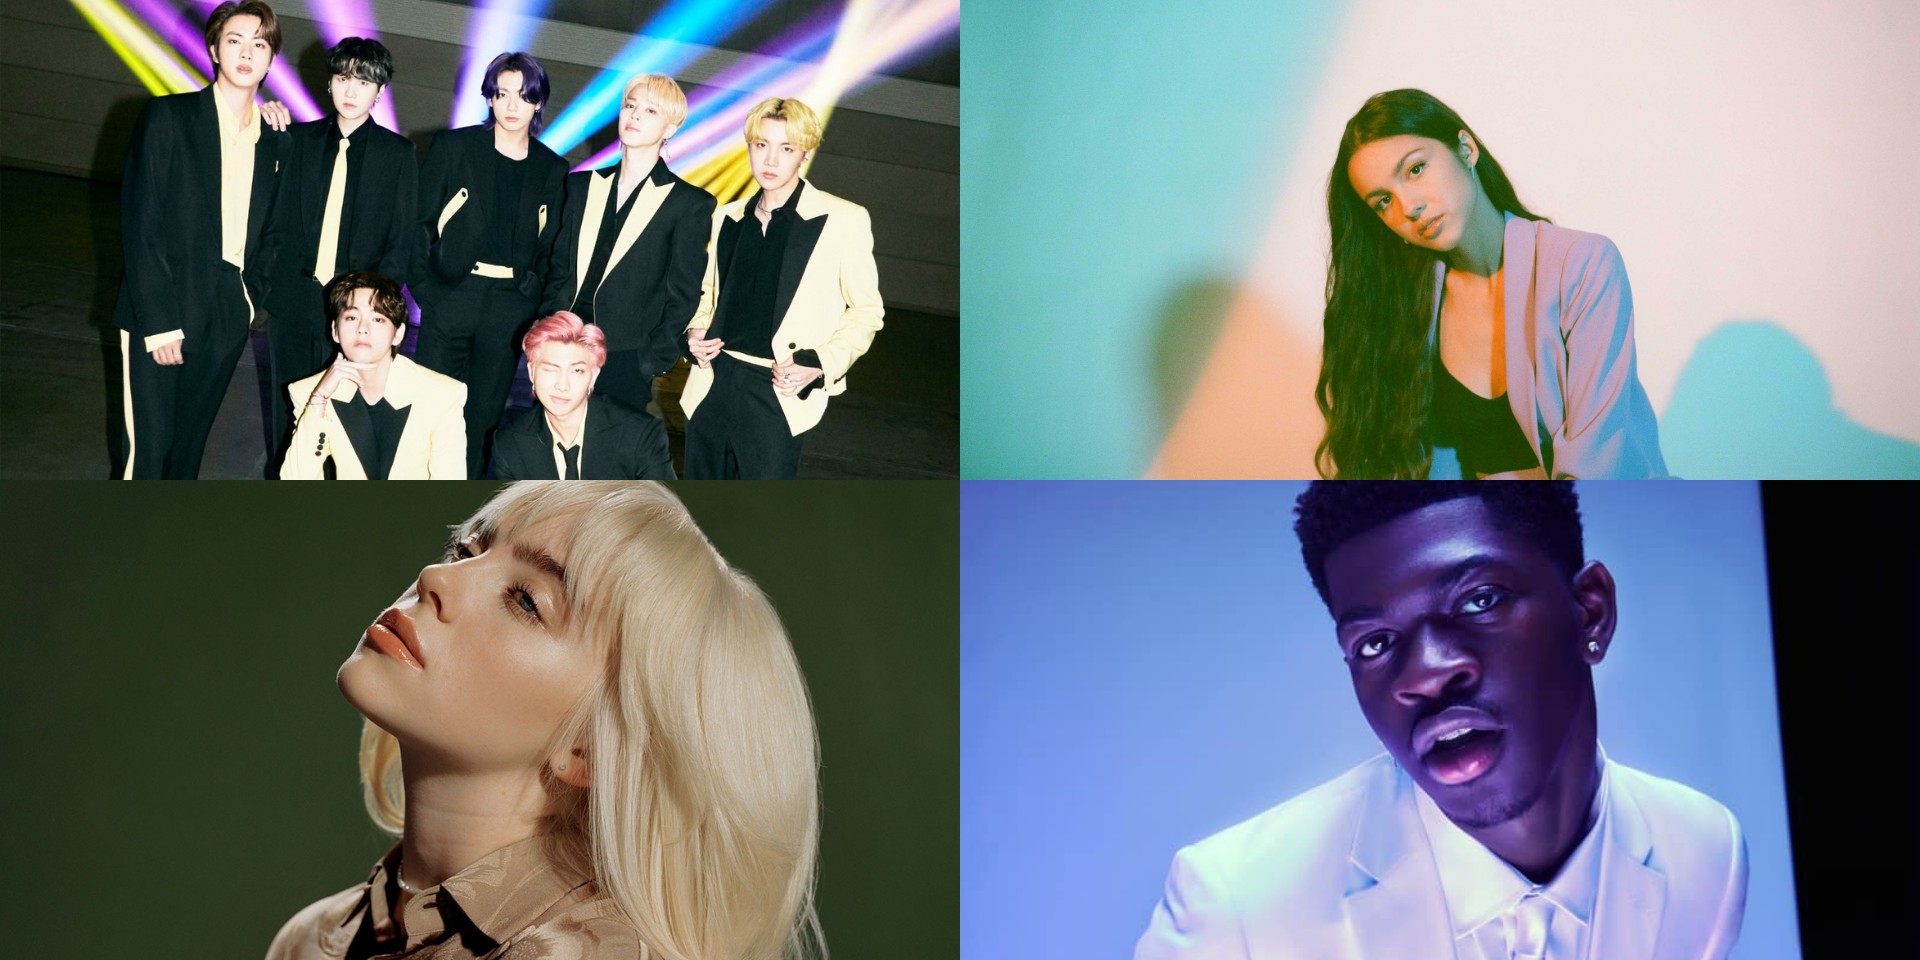 Here's how to watch the 2022 GRAMMY Awards – performances by BTS, Olivia Rodrigo, Billie Eilish, Lil Nas X, and more